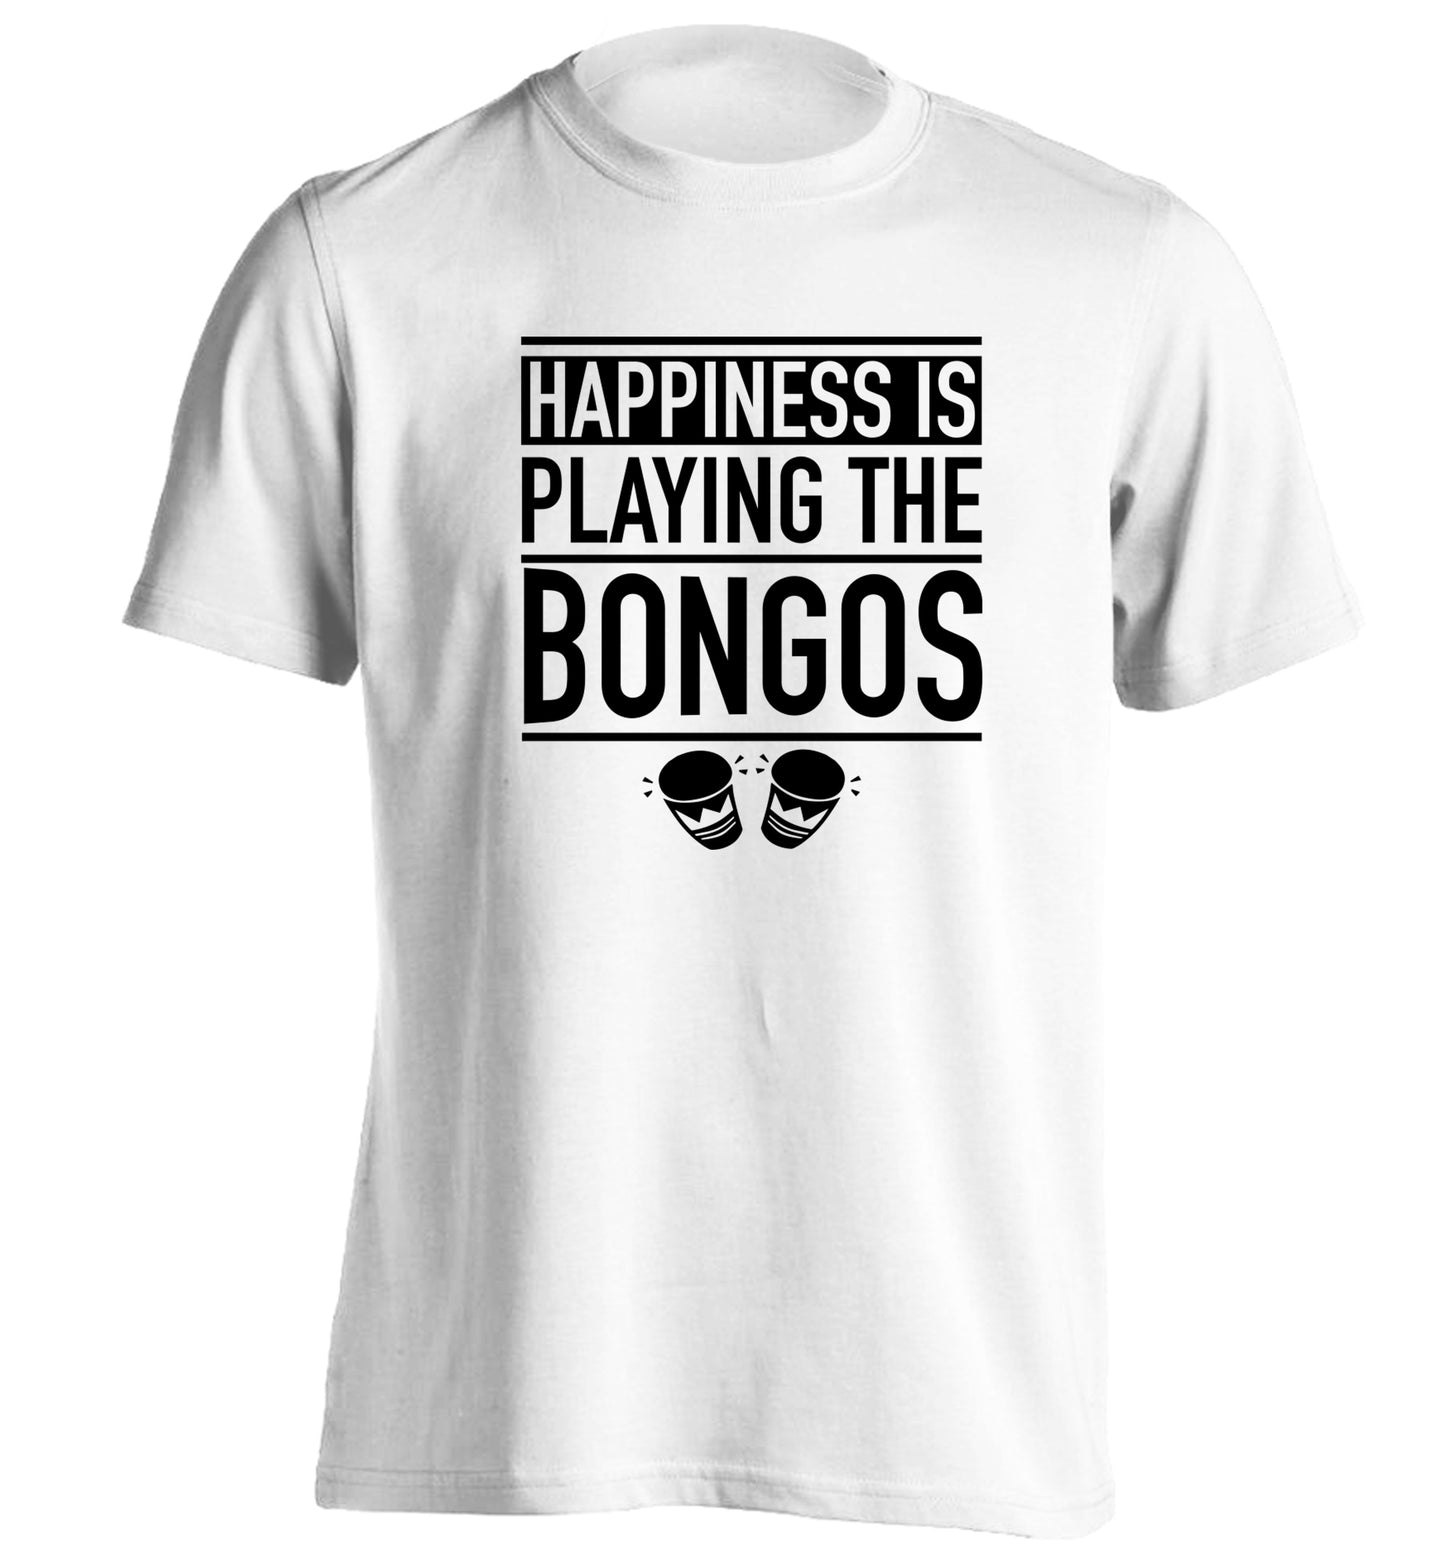 Happiness is playing the bongos adults unisex white Tshirt 2XL